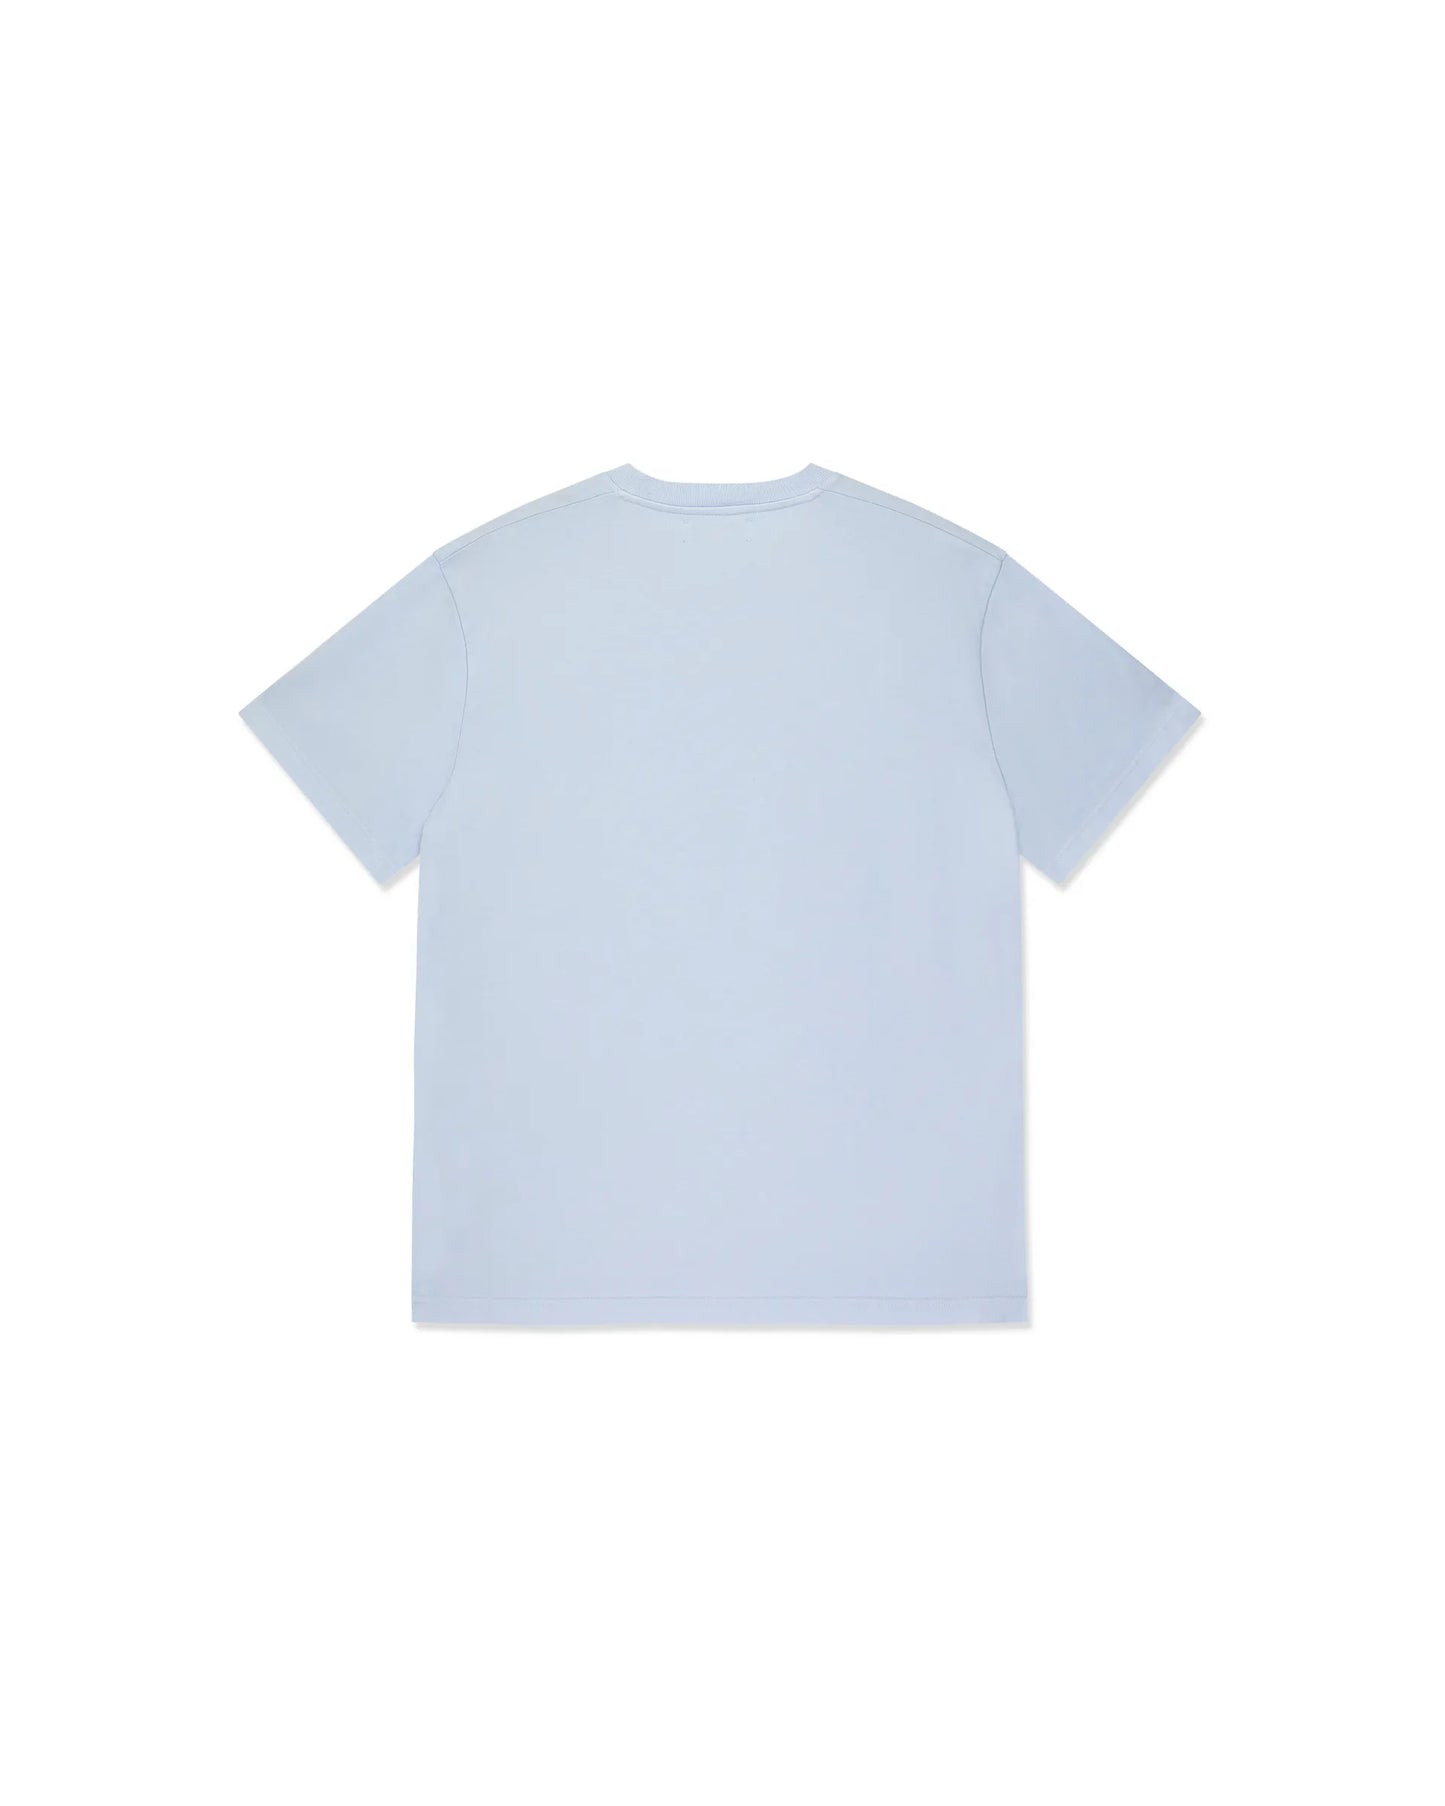 Blue Candy Tee